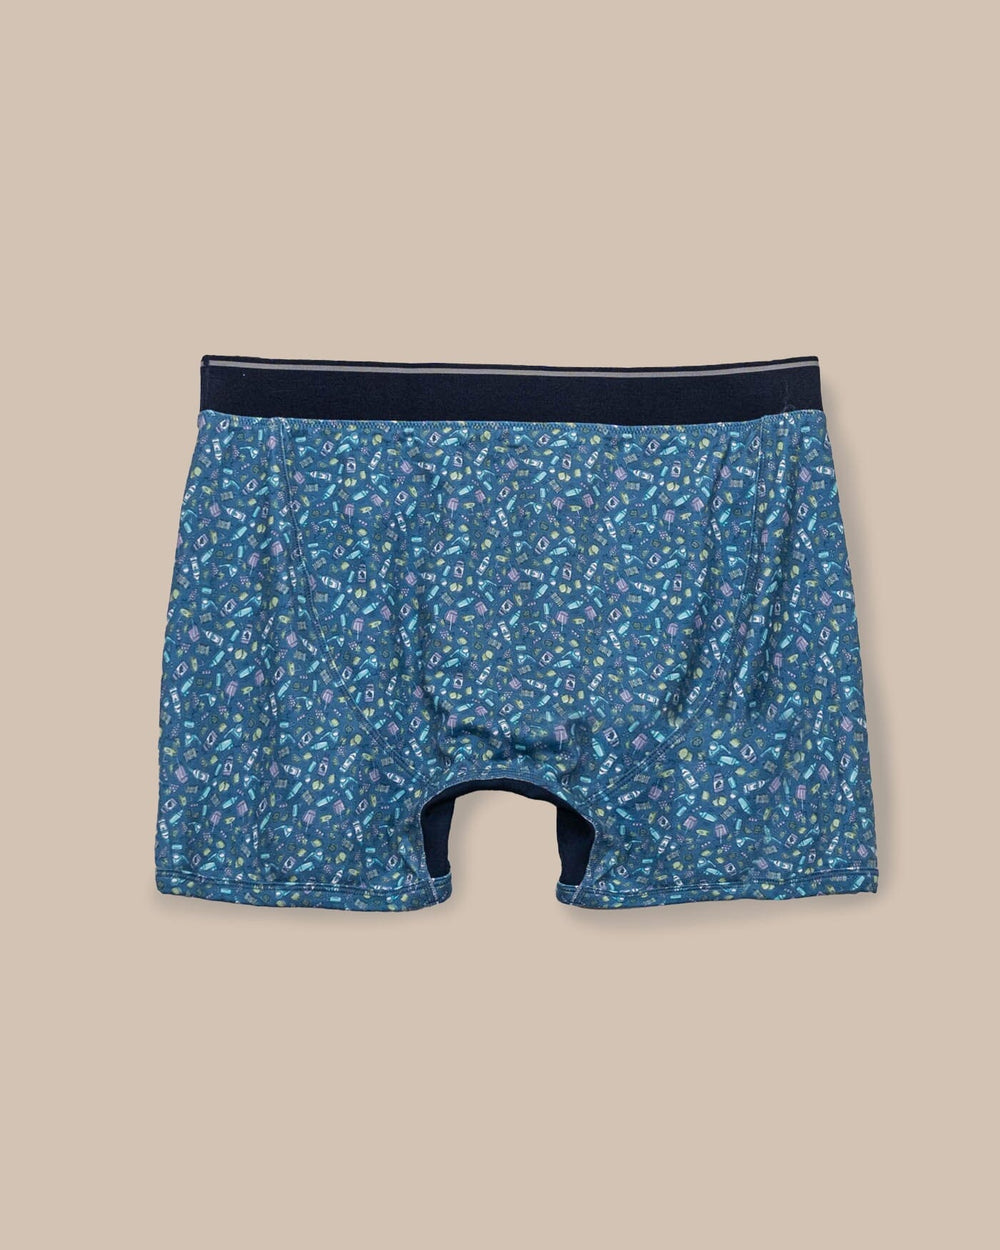 The back view of the Southern Tide Dazed and Transfused Boxer Brief by Southern Tide - Coronet Blue